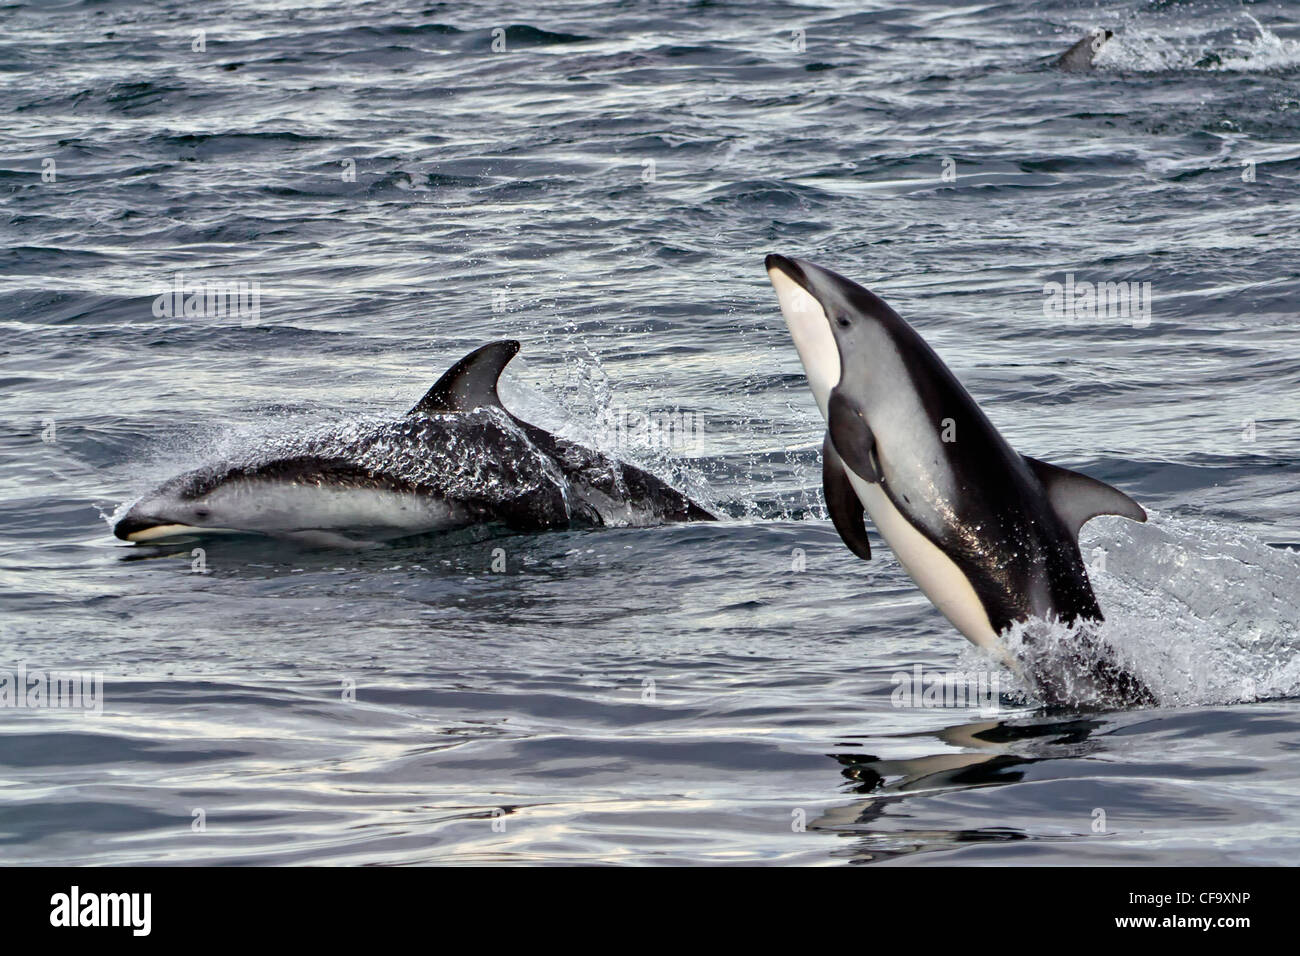 Pacific White Sided Dolphins (Lagenorhynchus obliquidens) jumping at high speed, Broughton Archipelago, off Vancouver Island Stock Photo